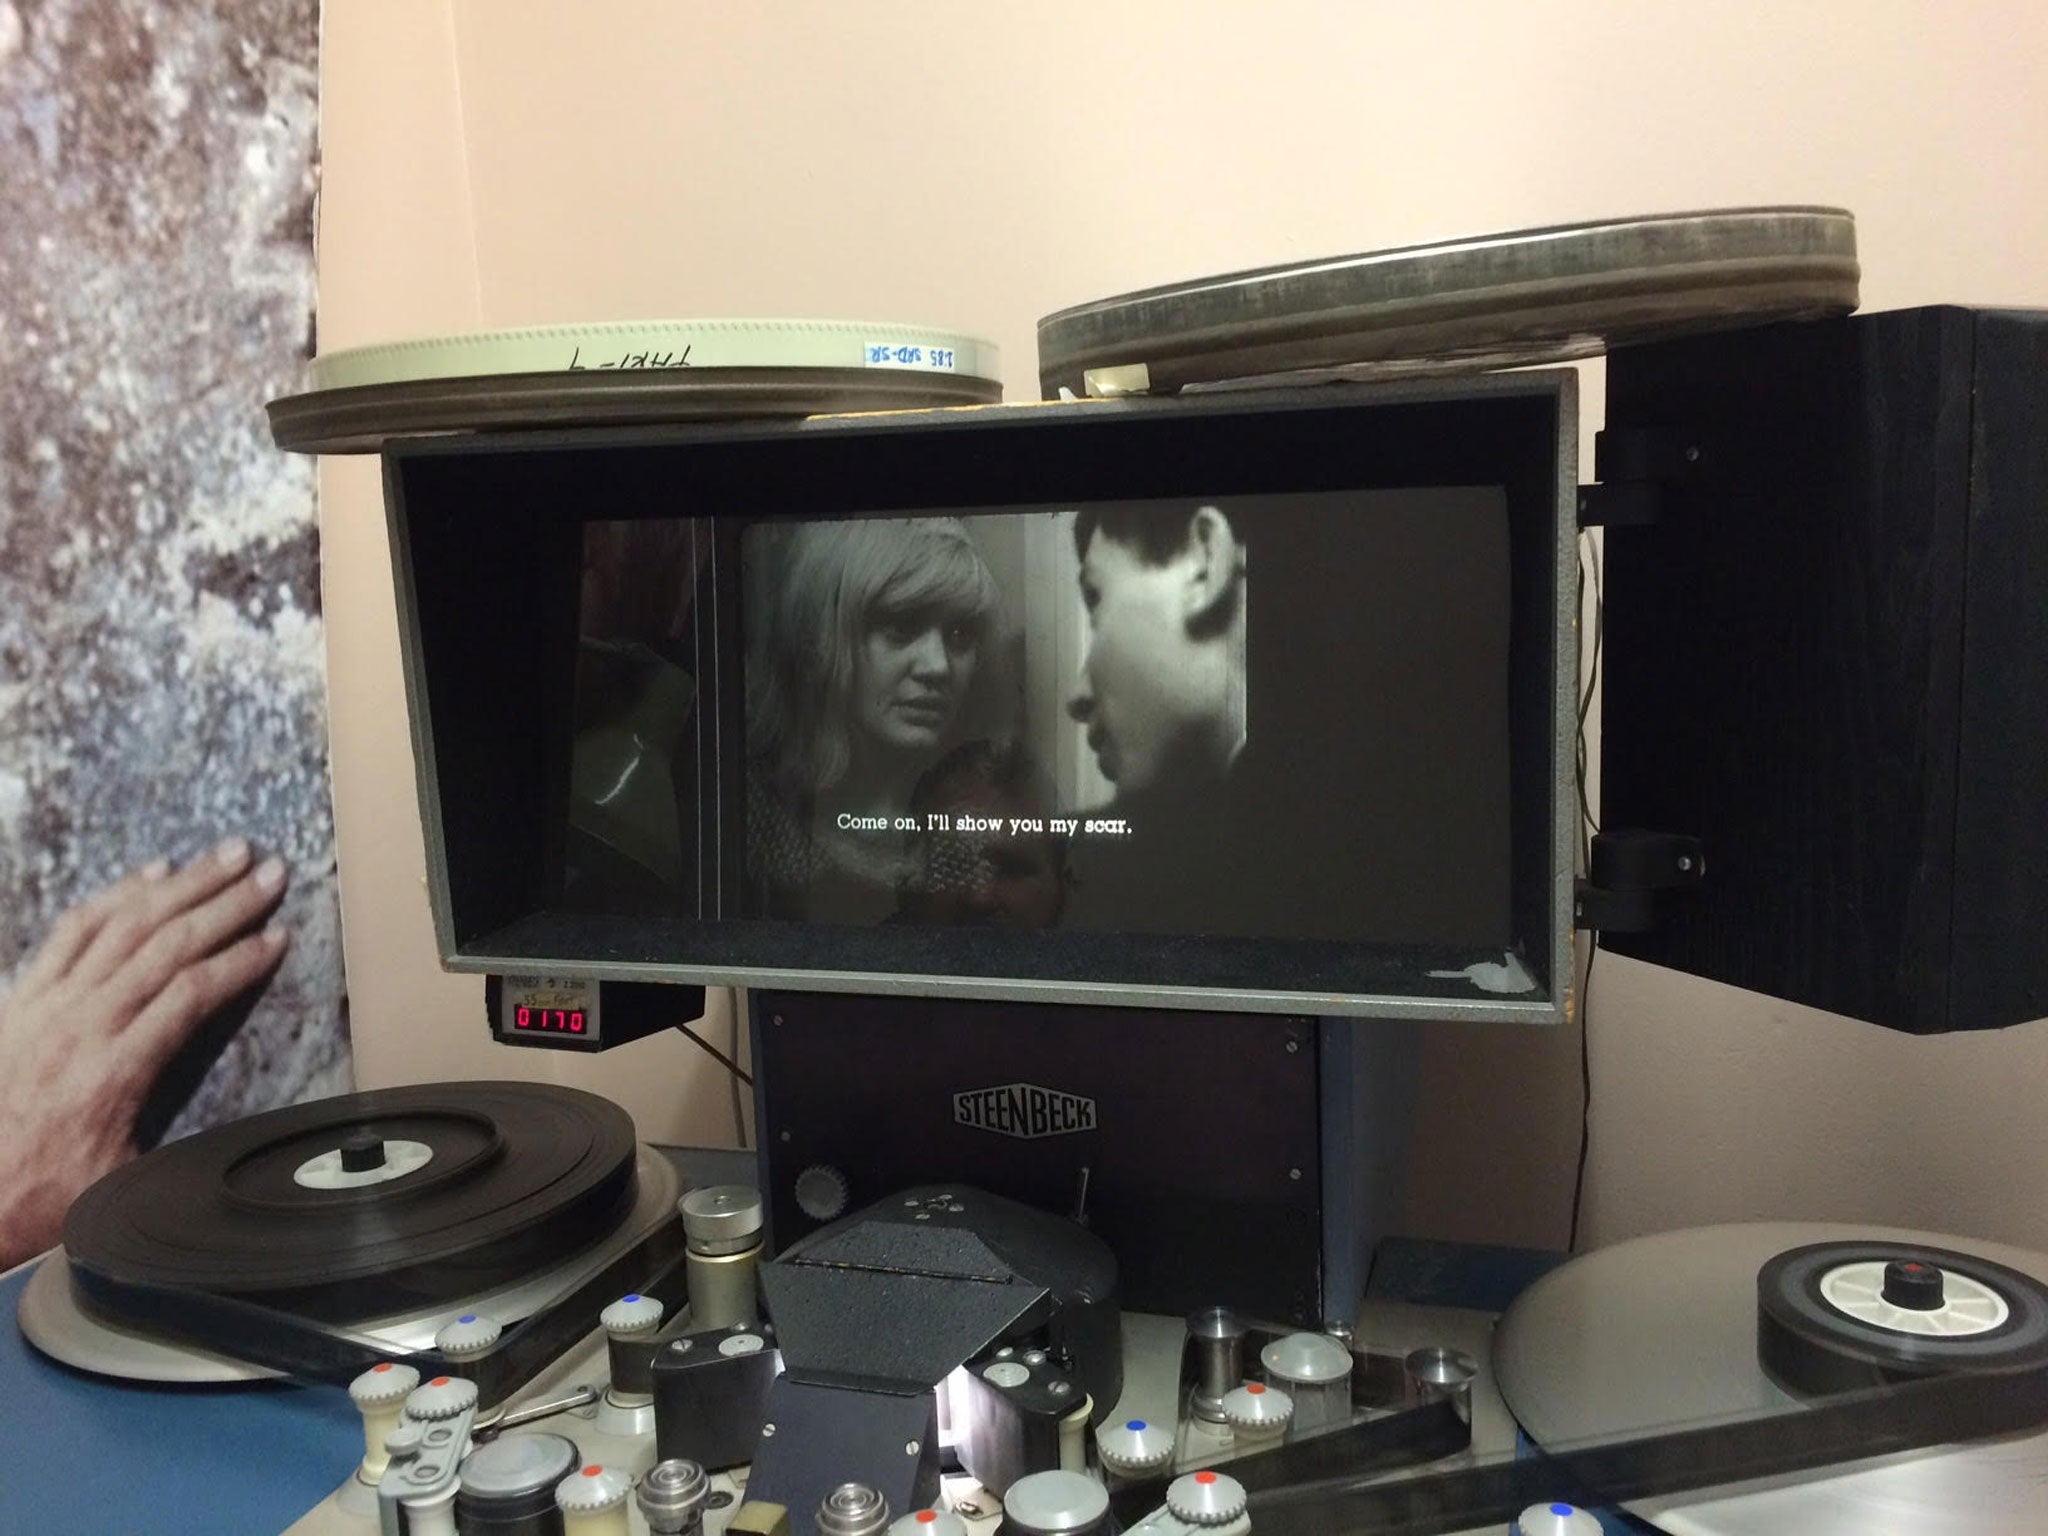 A 35mm film of Loves of a Blonde being viewed on a Steenbeck editing suite by the Overnight festival curators